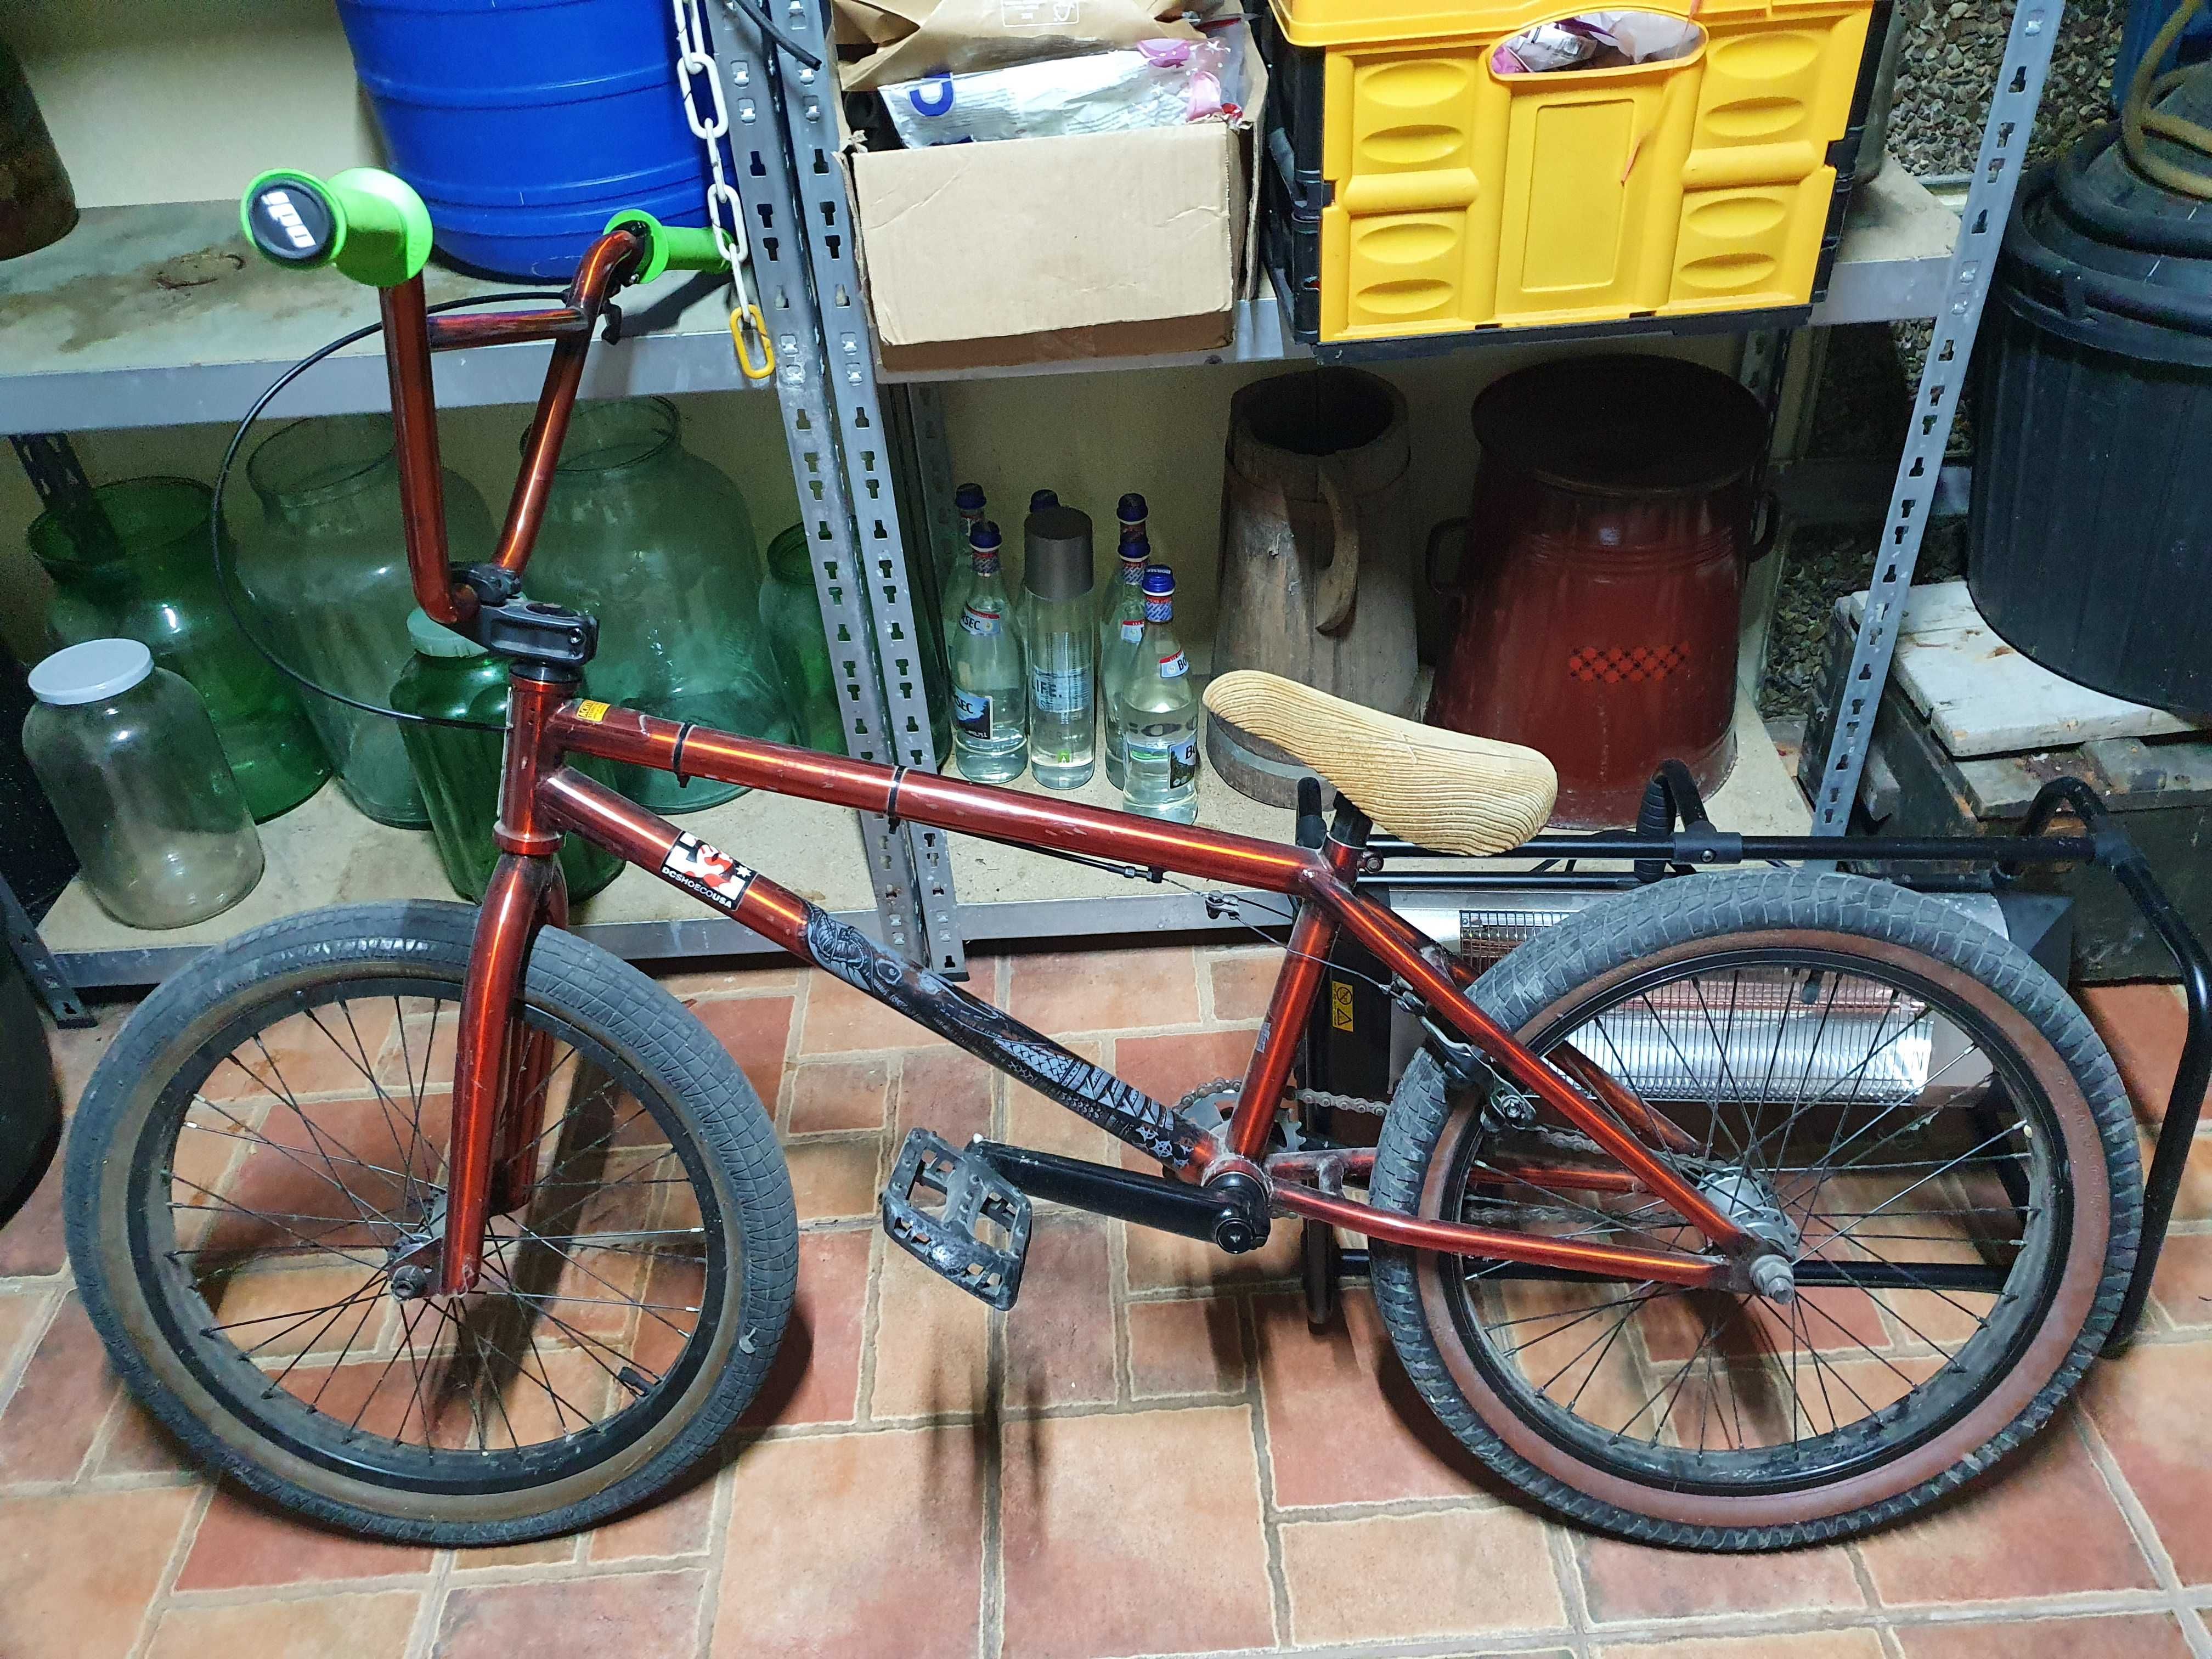 Bmx Stereo bike co wire 2014 impecabil